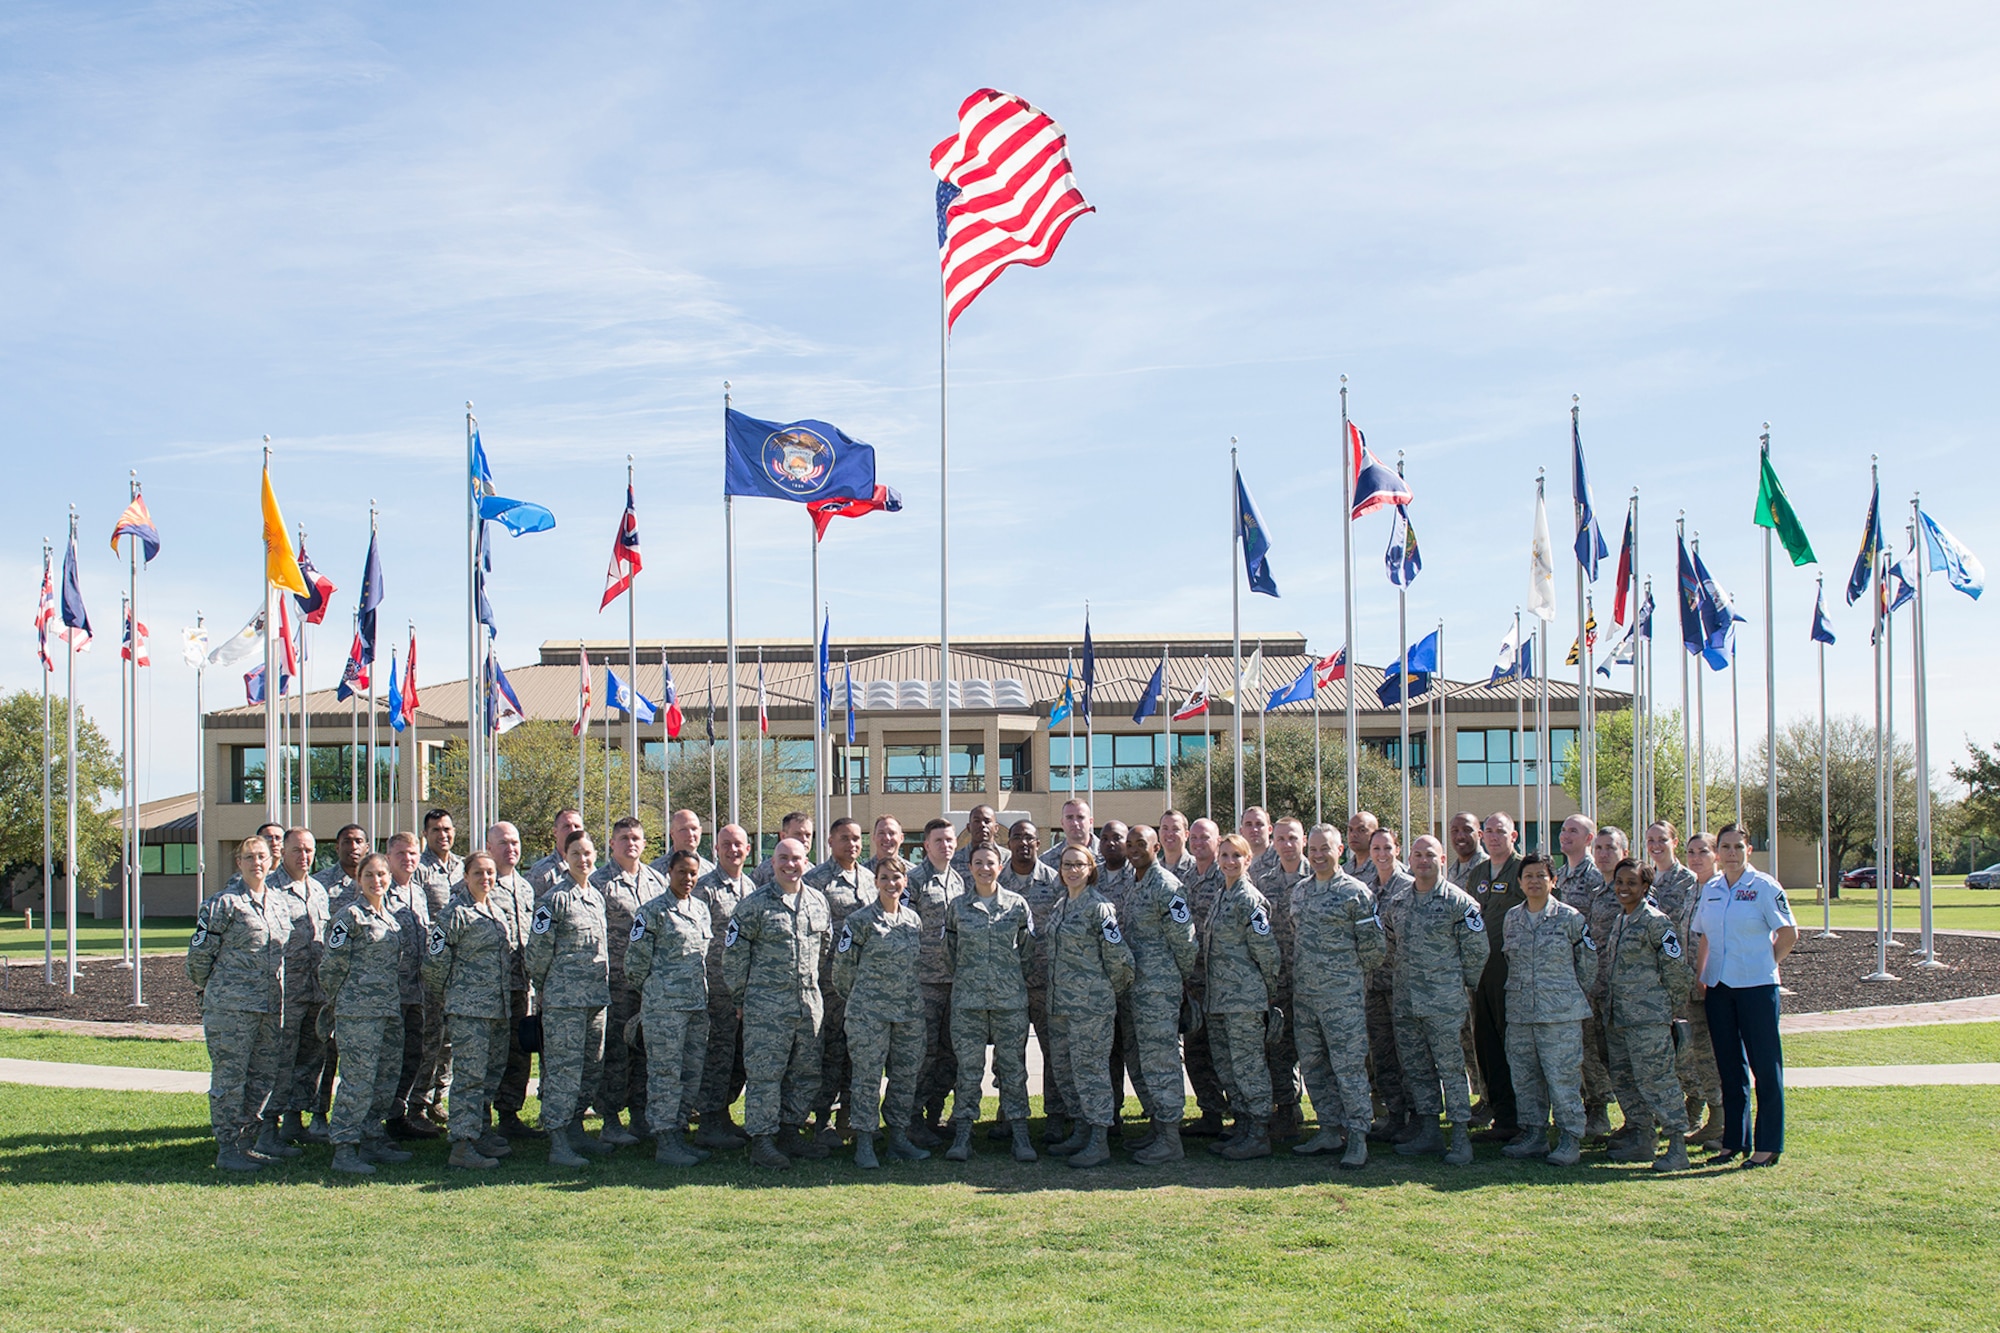 The 2017 Joint Base San Antonio-Lackland senior master sergeant selects pose for a group photo at the 37th Training Wing parade field March 2, 2017. The Air Force selected 1,391 master sergeants for promotion, with an overall selection rate of 11.8 percent.